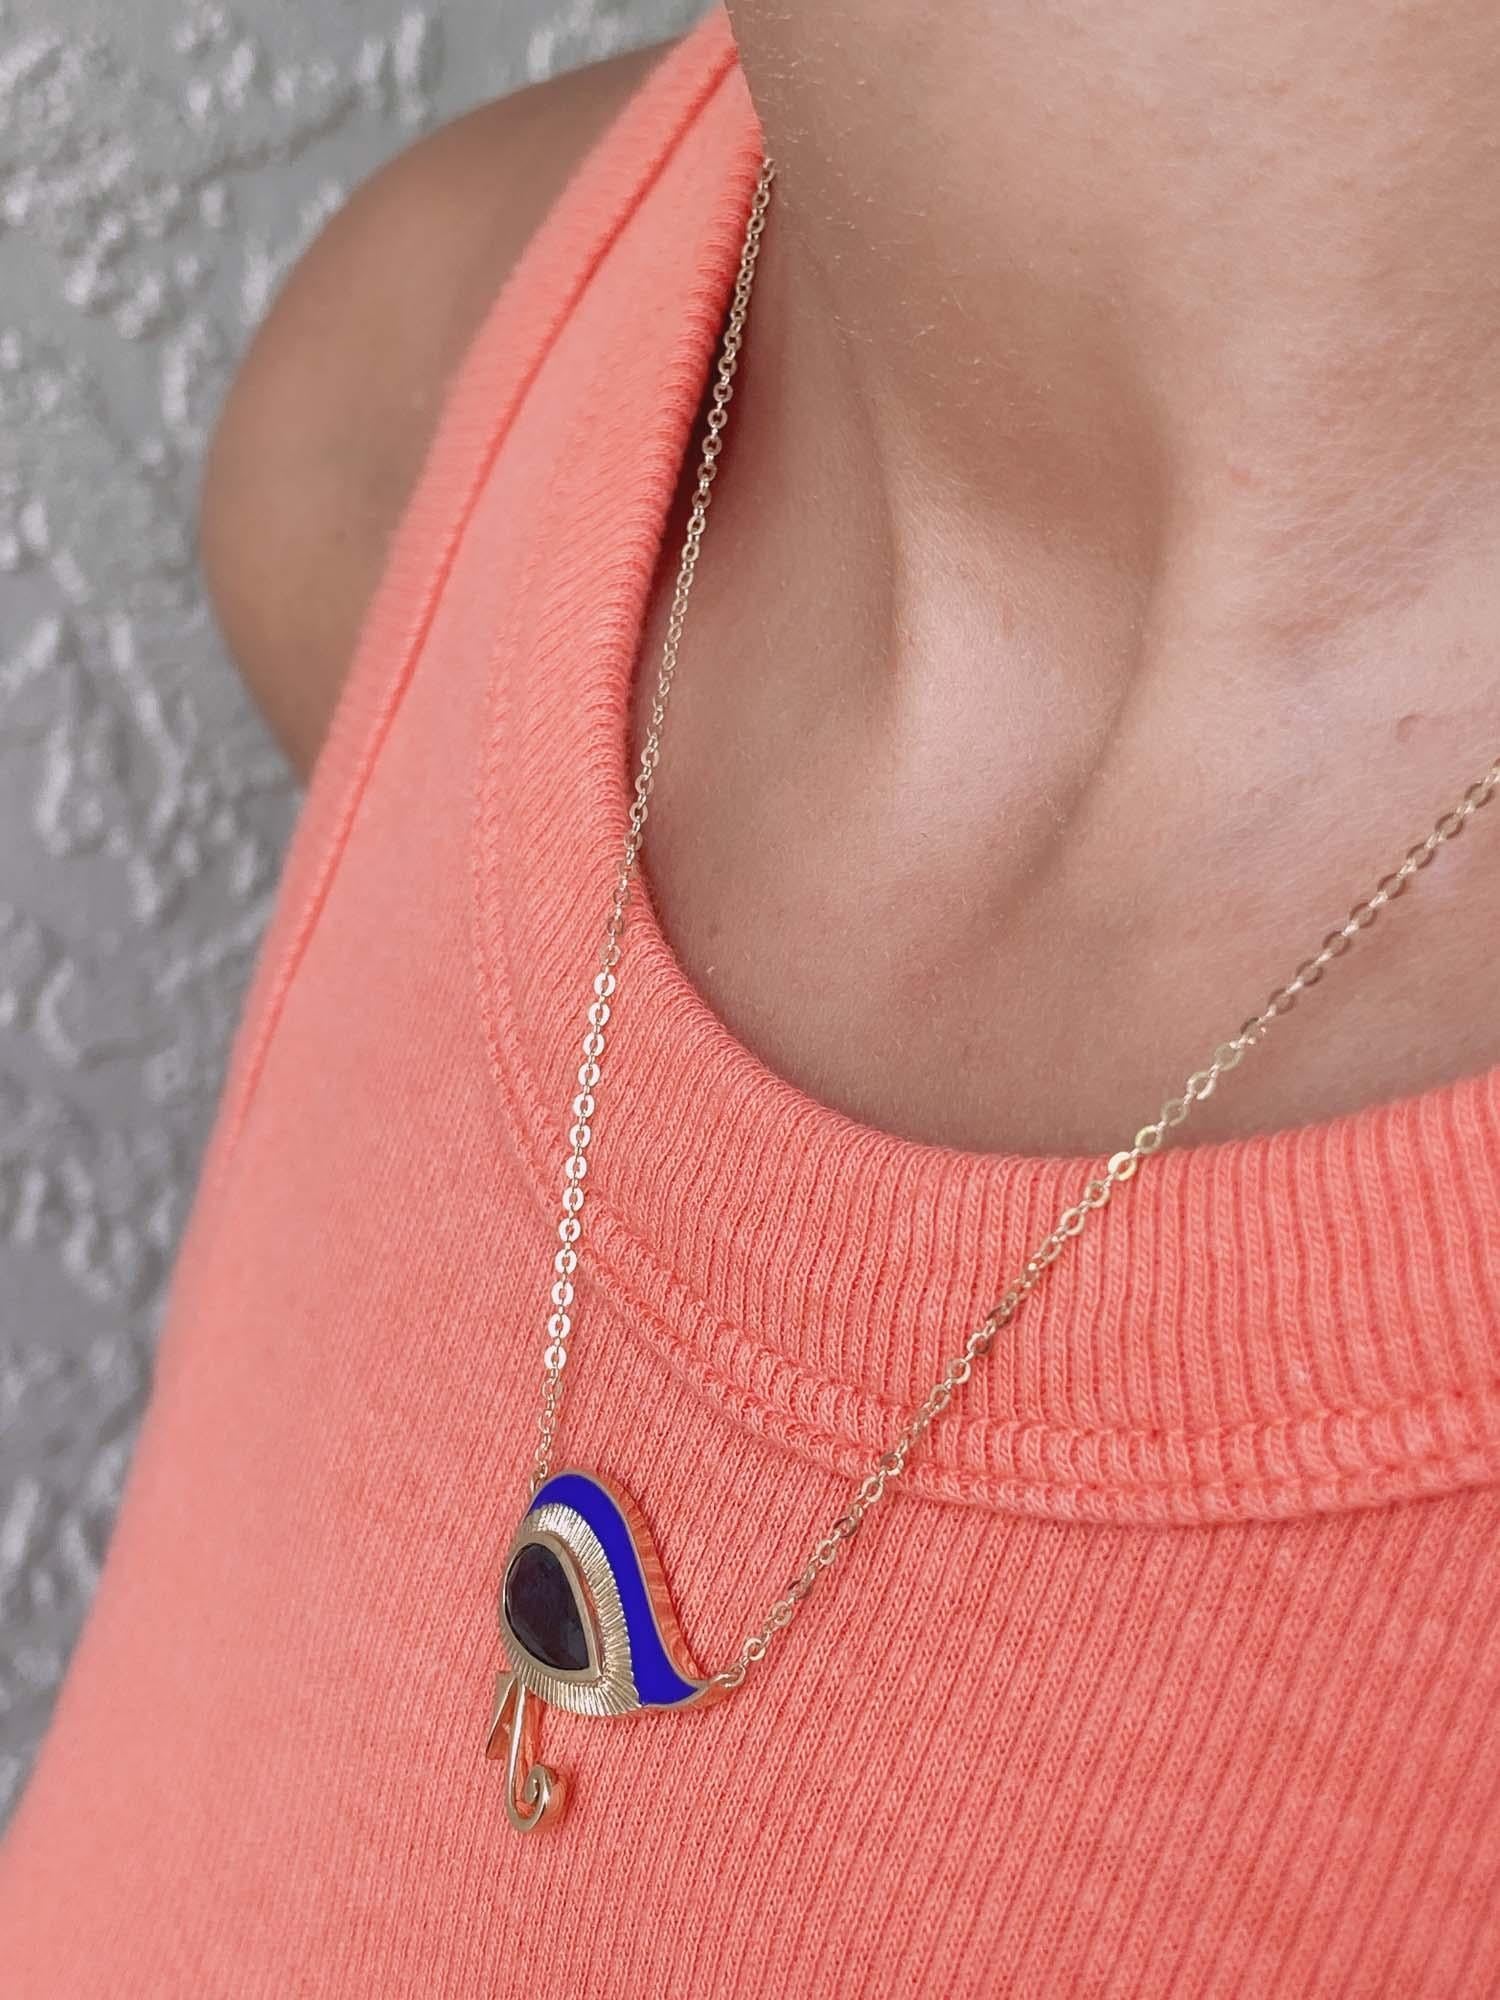 Women's Eye of Horus 1.82 Ct Nigerian Sapphire with Blue Enamel 9k Gold Necklace R4262 For Sale